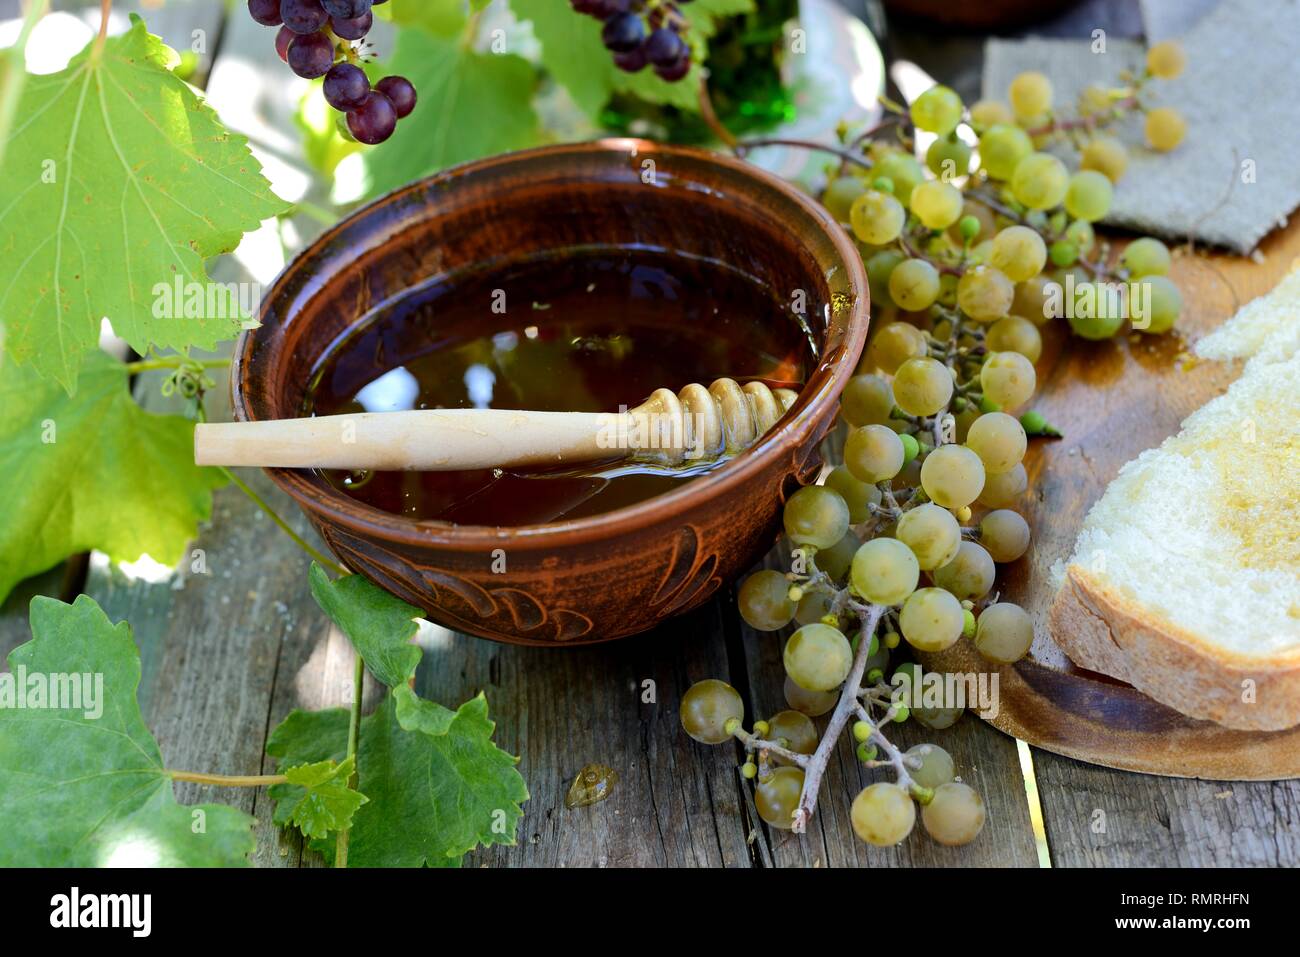 Still life with honey, grapes and white bread Stock Photo